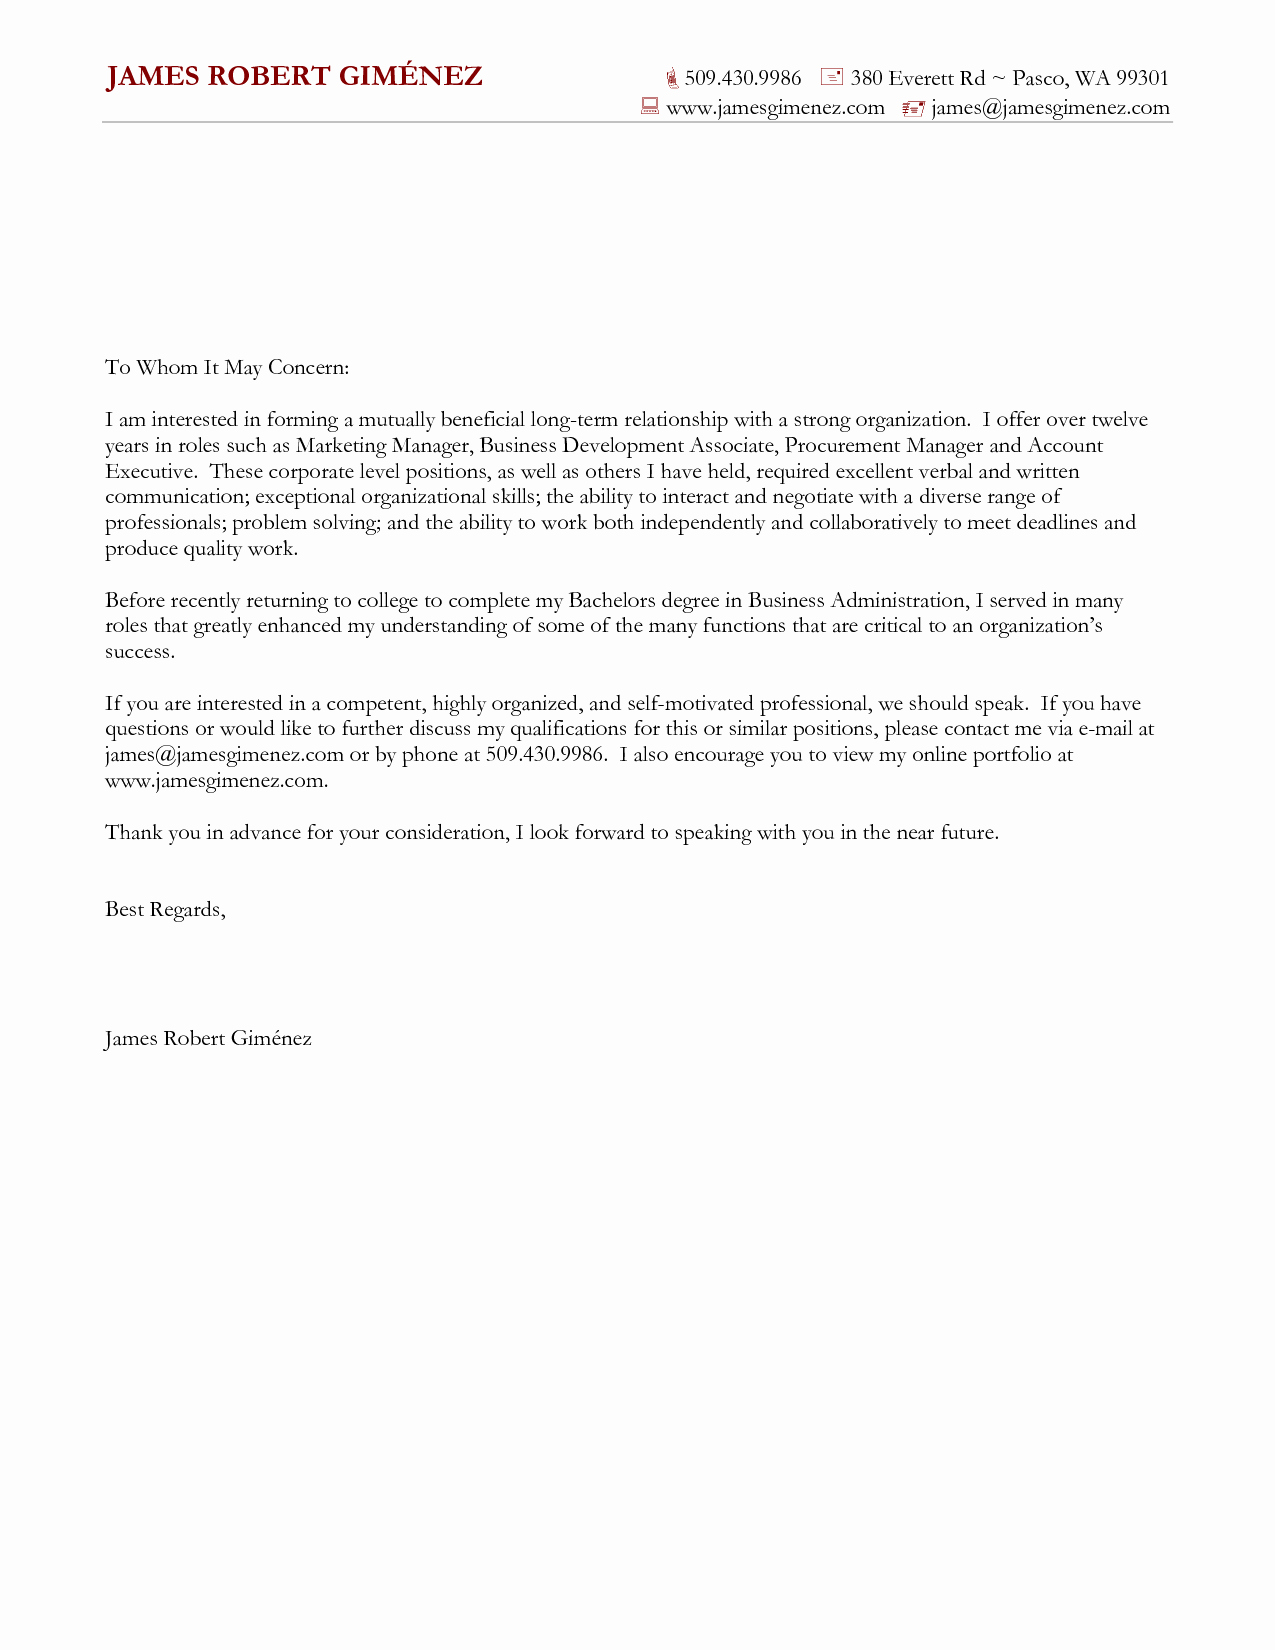 General Cover Letters for Jobs Beautiful General Cover Letter Sample for Job Application – College